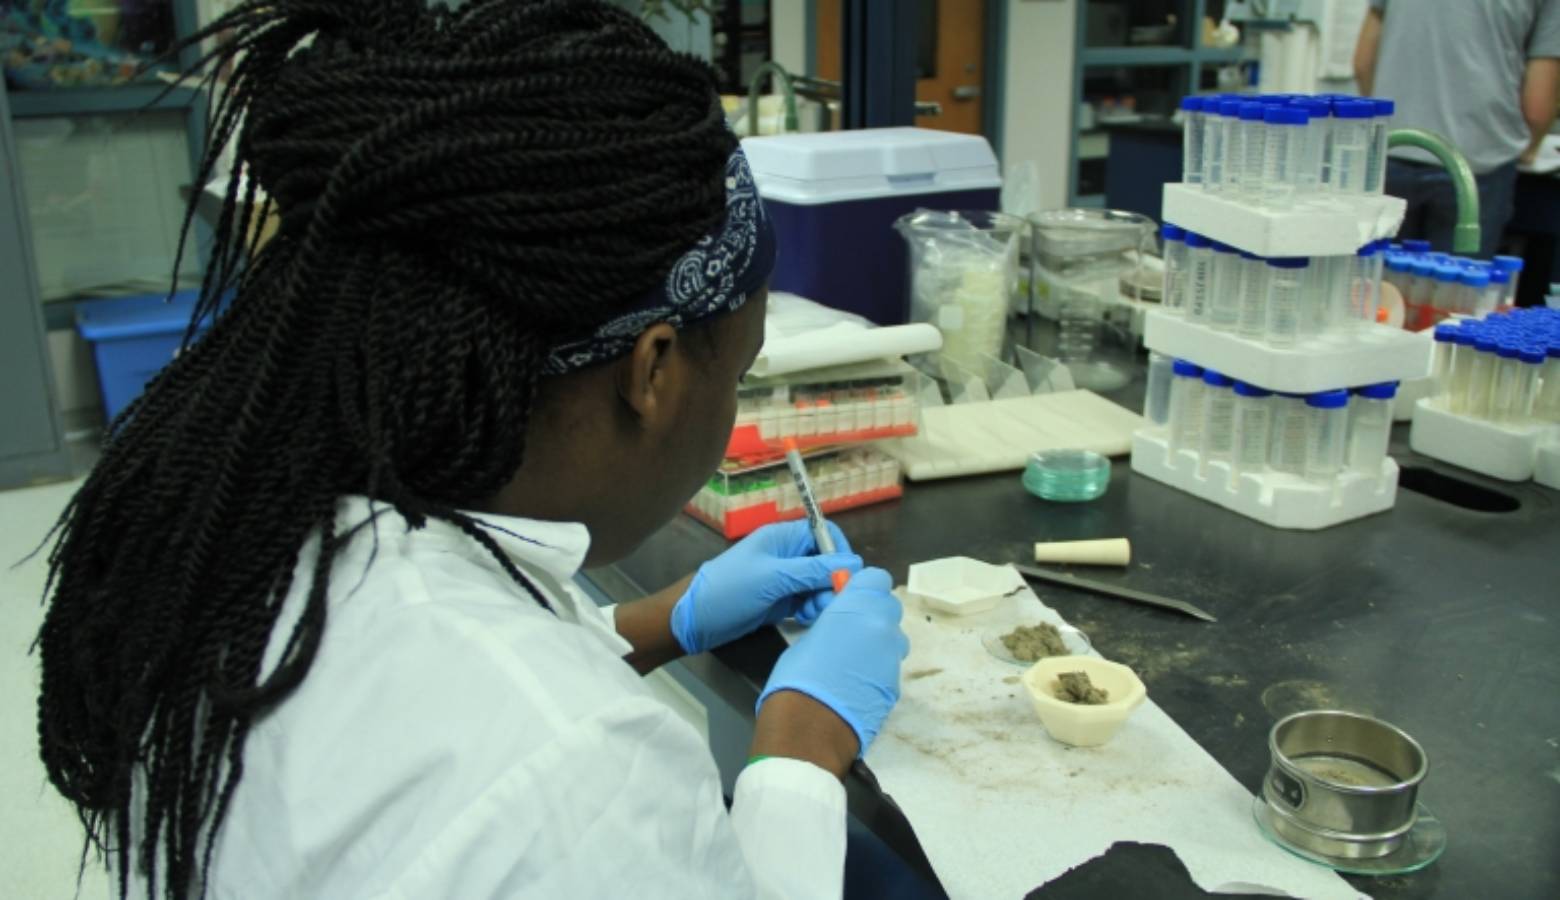 Isheka Orr analyzes dust in the lab. Orr, from Claflin University, is participating in IUPUI's Diversity Summer Undergraduate Research Opportunity Program. (Photo courtesy IUPUI)